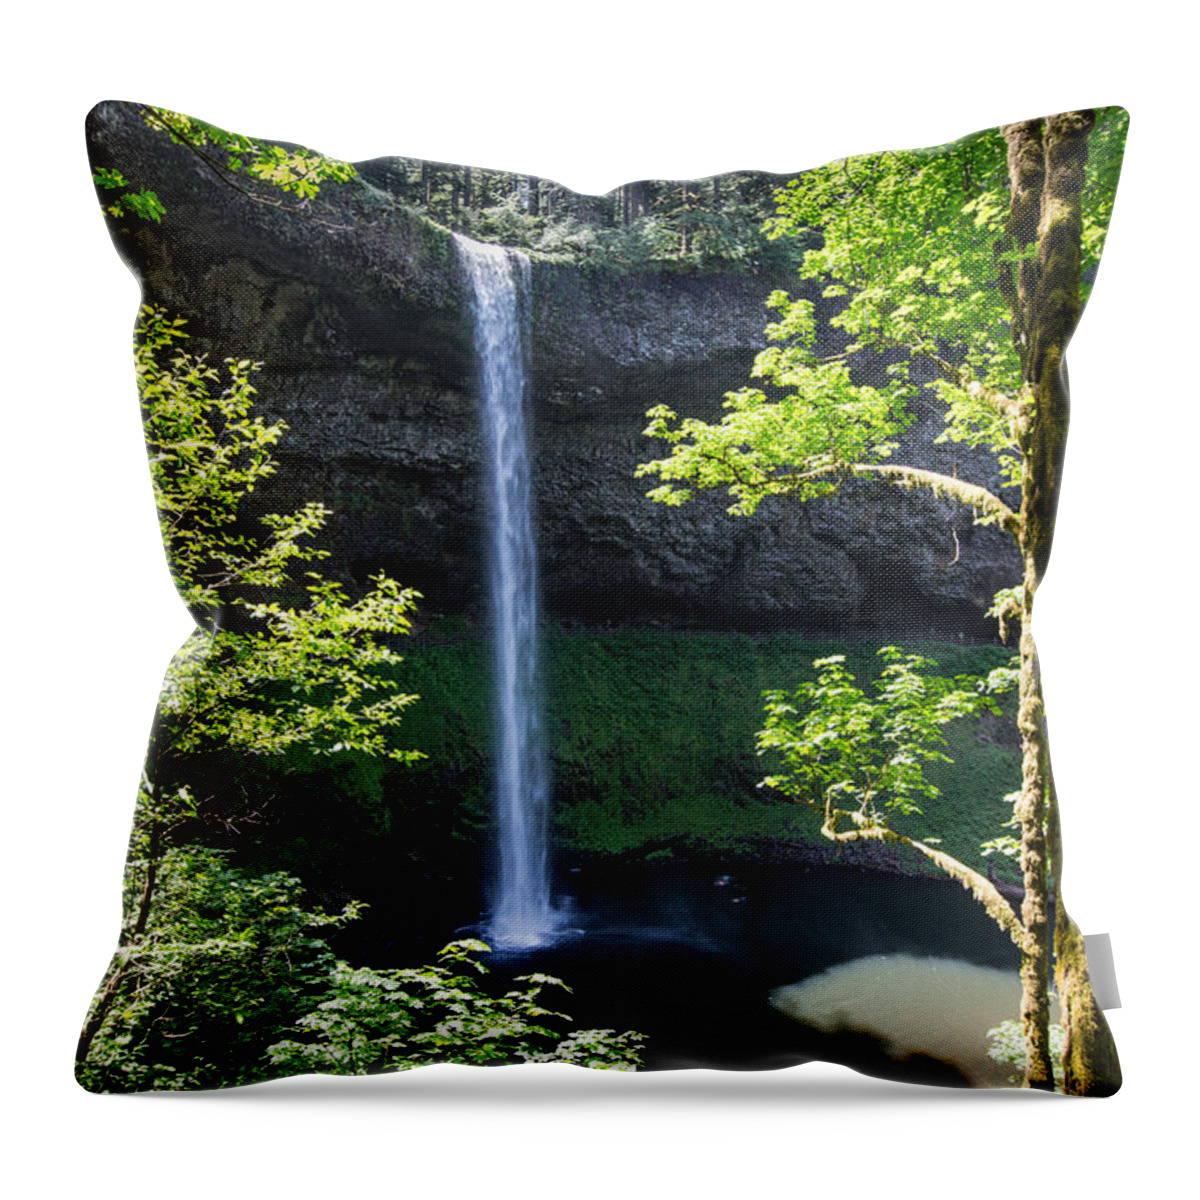 Sam Amato Photography Throw Pillow featuring the photograph Silver Falls Oregon by Sam Amato